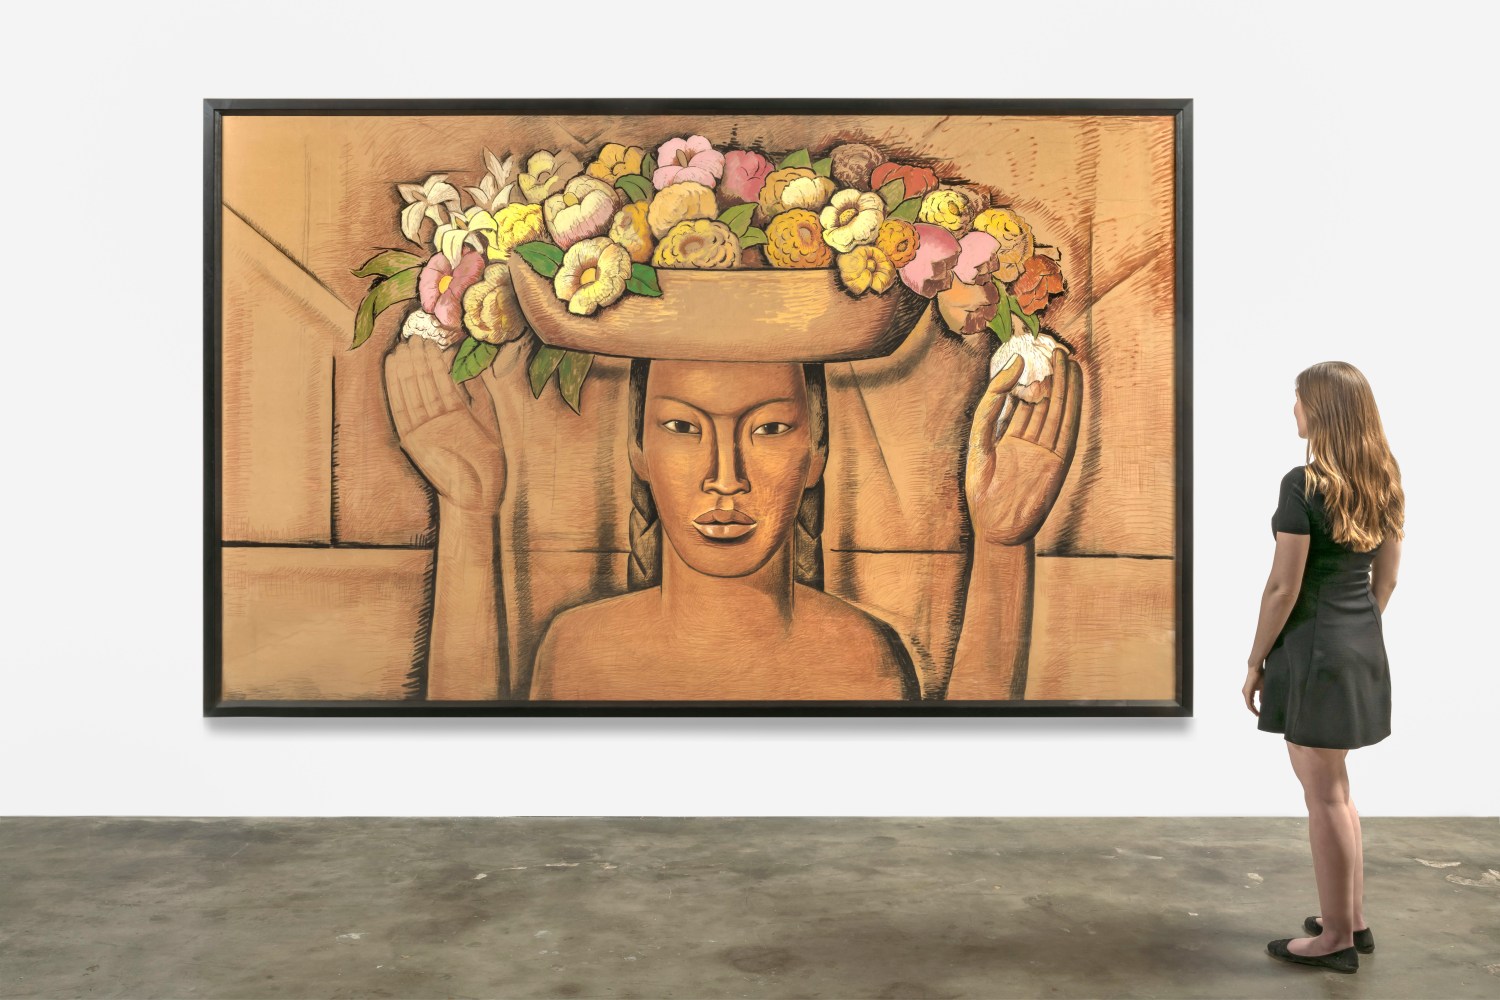 Alfredo Ramos Martínez (1871-1946) Mural Study for Vendedoras de Flores (Scripps College), c. 1945  Conté crayon and tempera on butcher paper mounted on nonwoven polyester sheet 87 x 138 inches;  221 x 350.5 centimeters LSFA# 14731